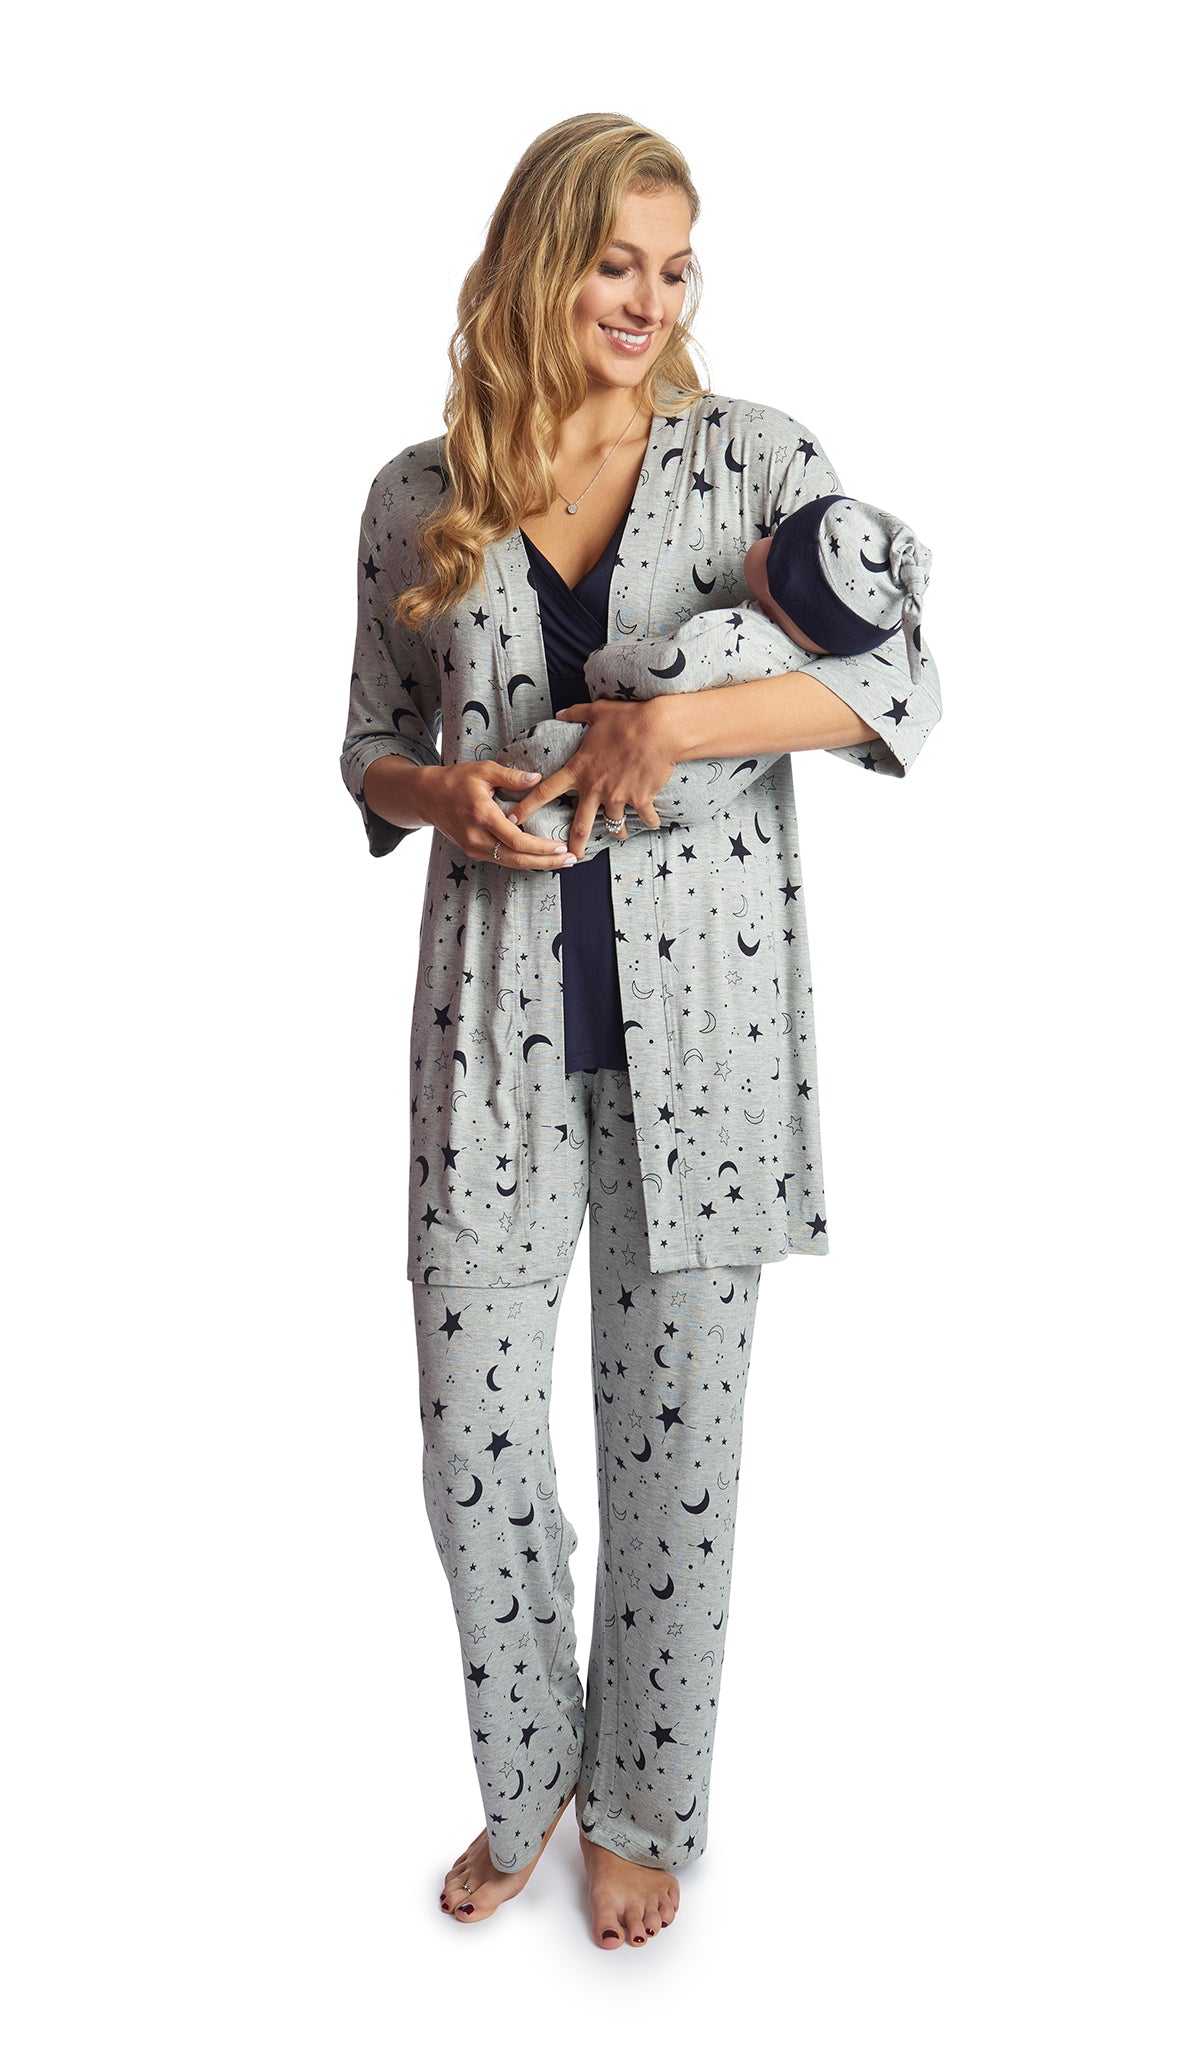 Twinkle Night Analise 5-Piece Set. Woman wearing 3/4 sleeve robe, tank top and pant while holding a baby wearing baby gown and knotted baby hat.